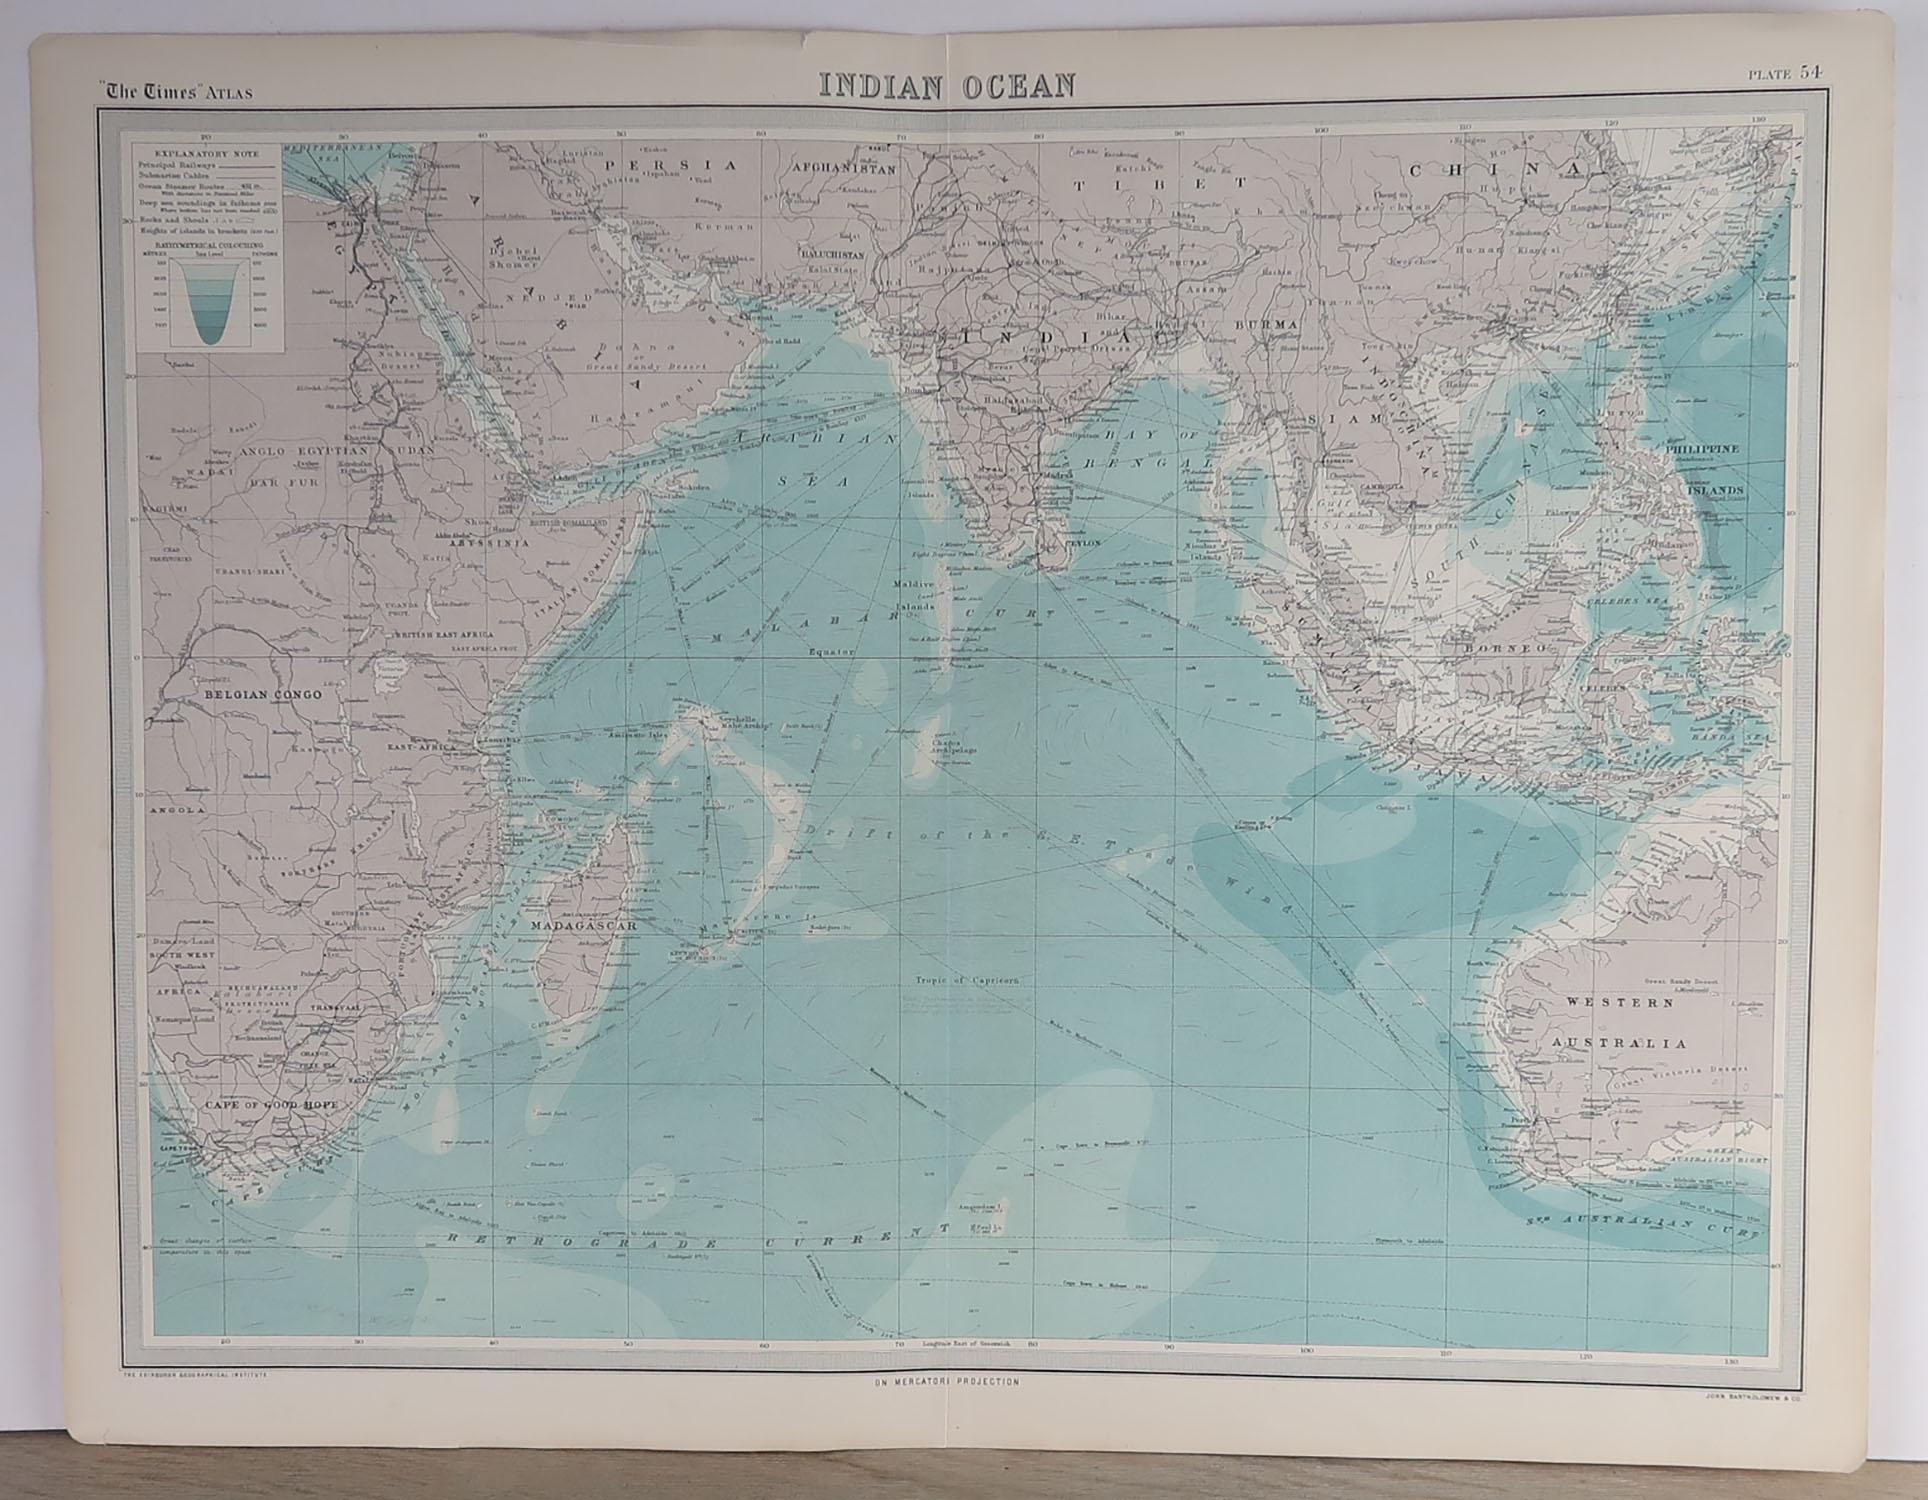 4 great maps or charts of the oceans

I particularly like the color of these maps

Unframed

Original color

By John Bartholomew and Co. Edinburgh Geographical Institute

Published, circa 1920

Free shipping.
 